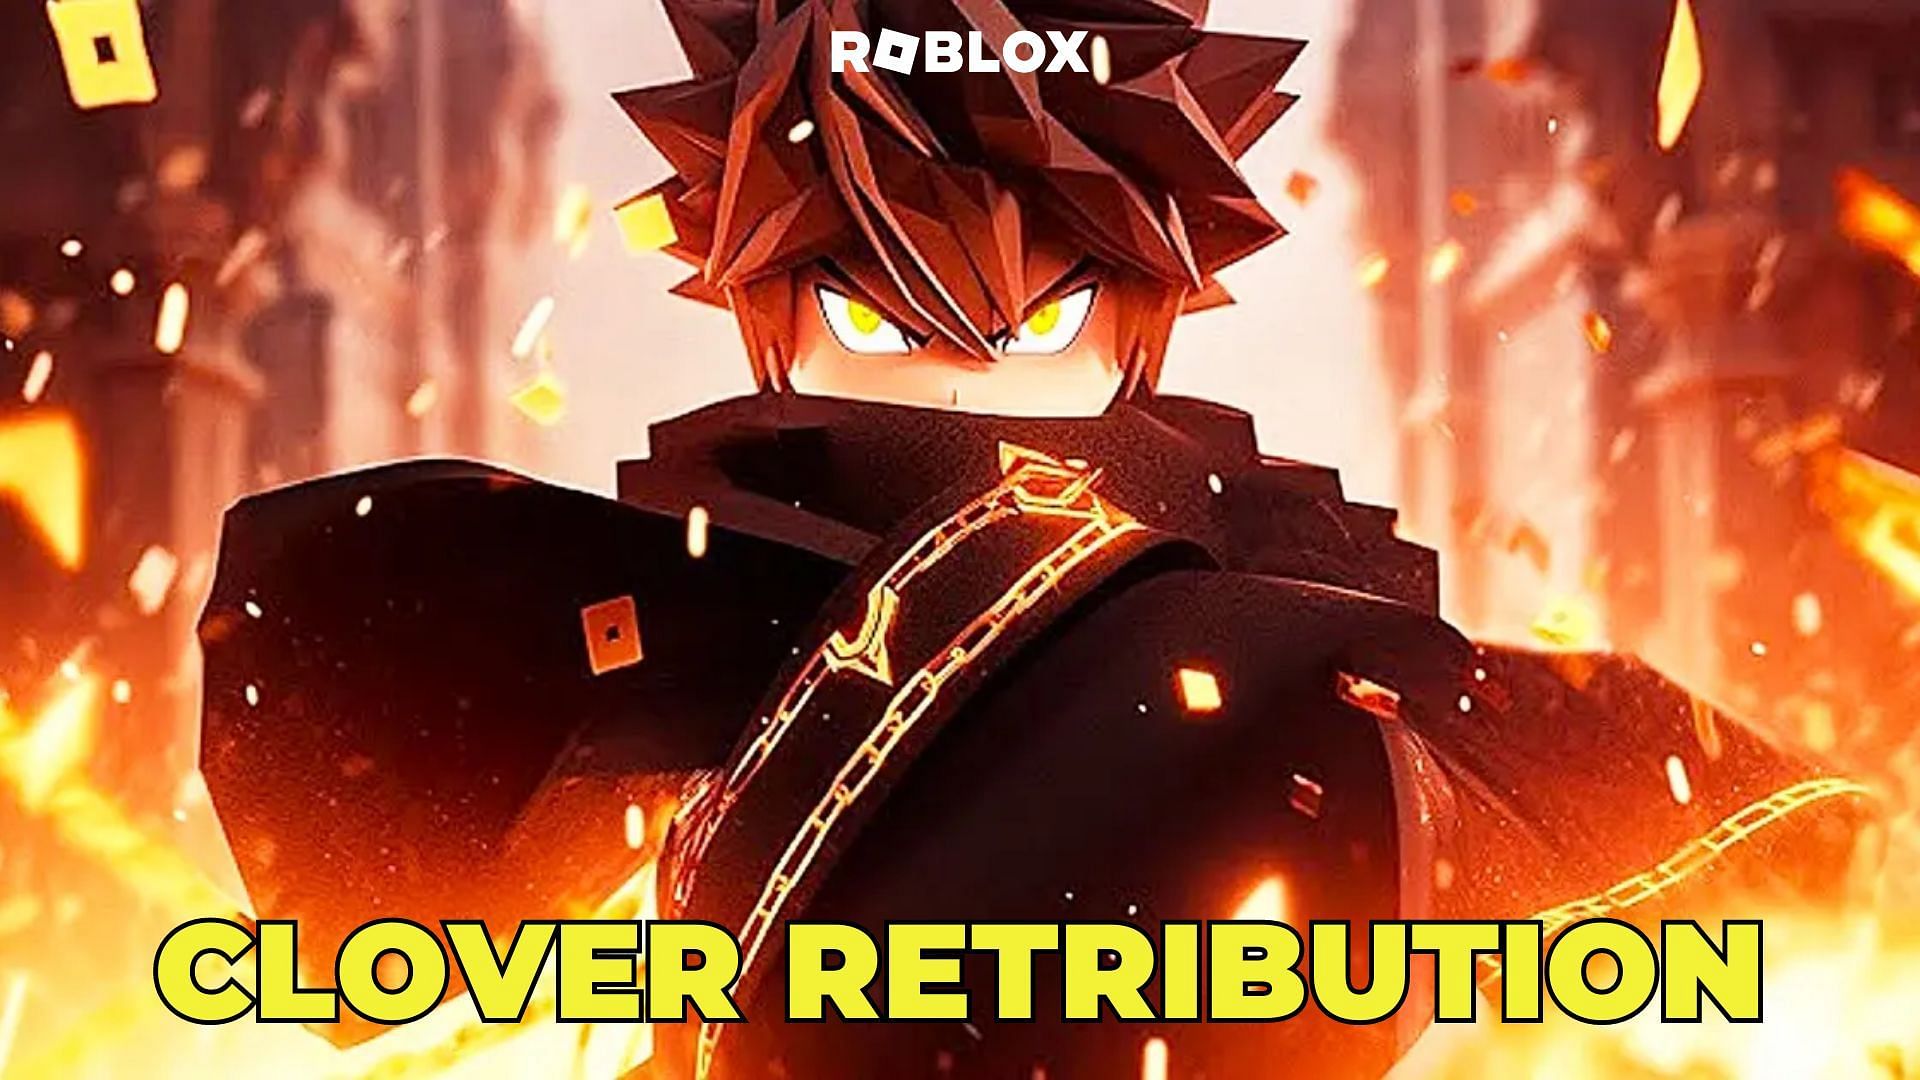 I joined the same server twice : r/roblox